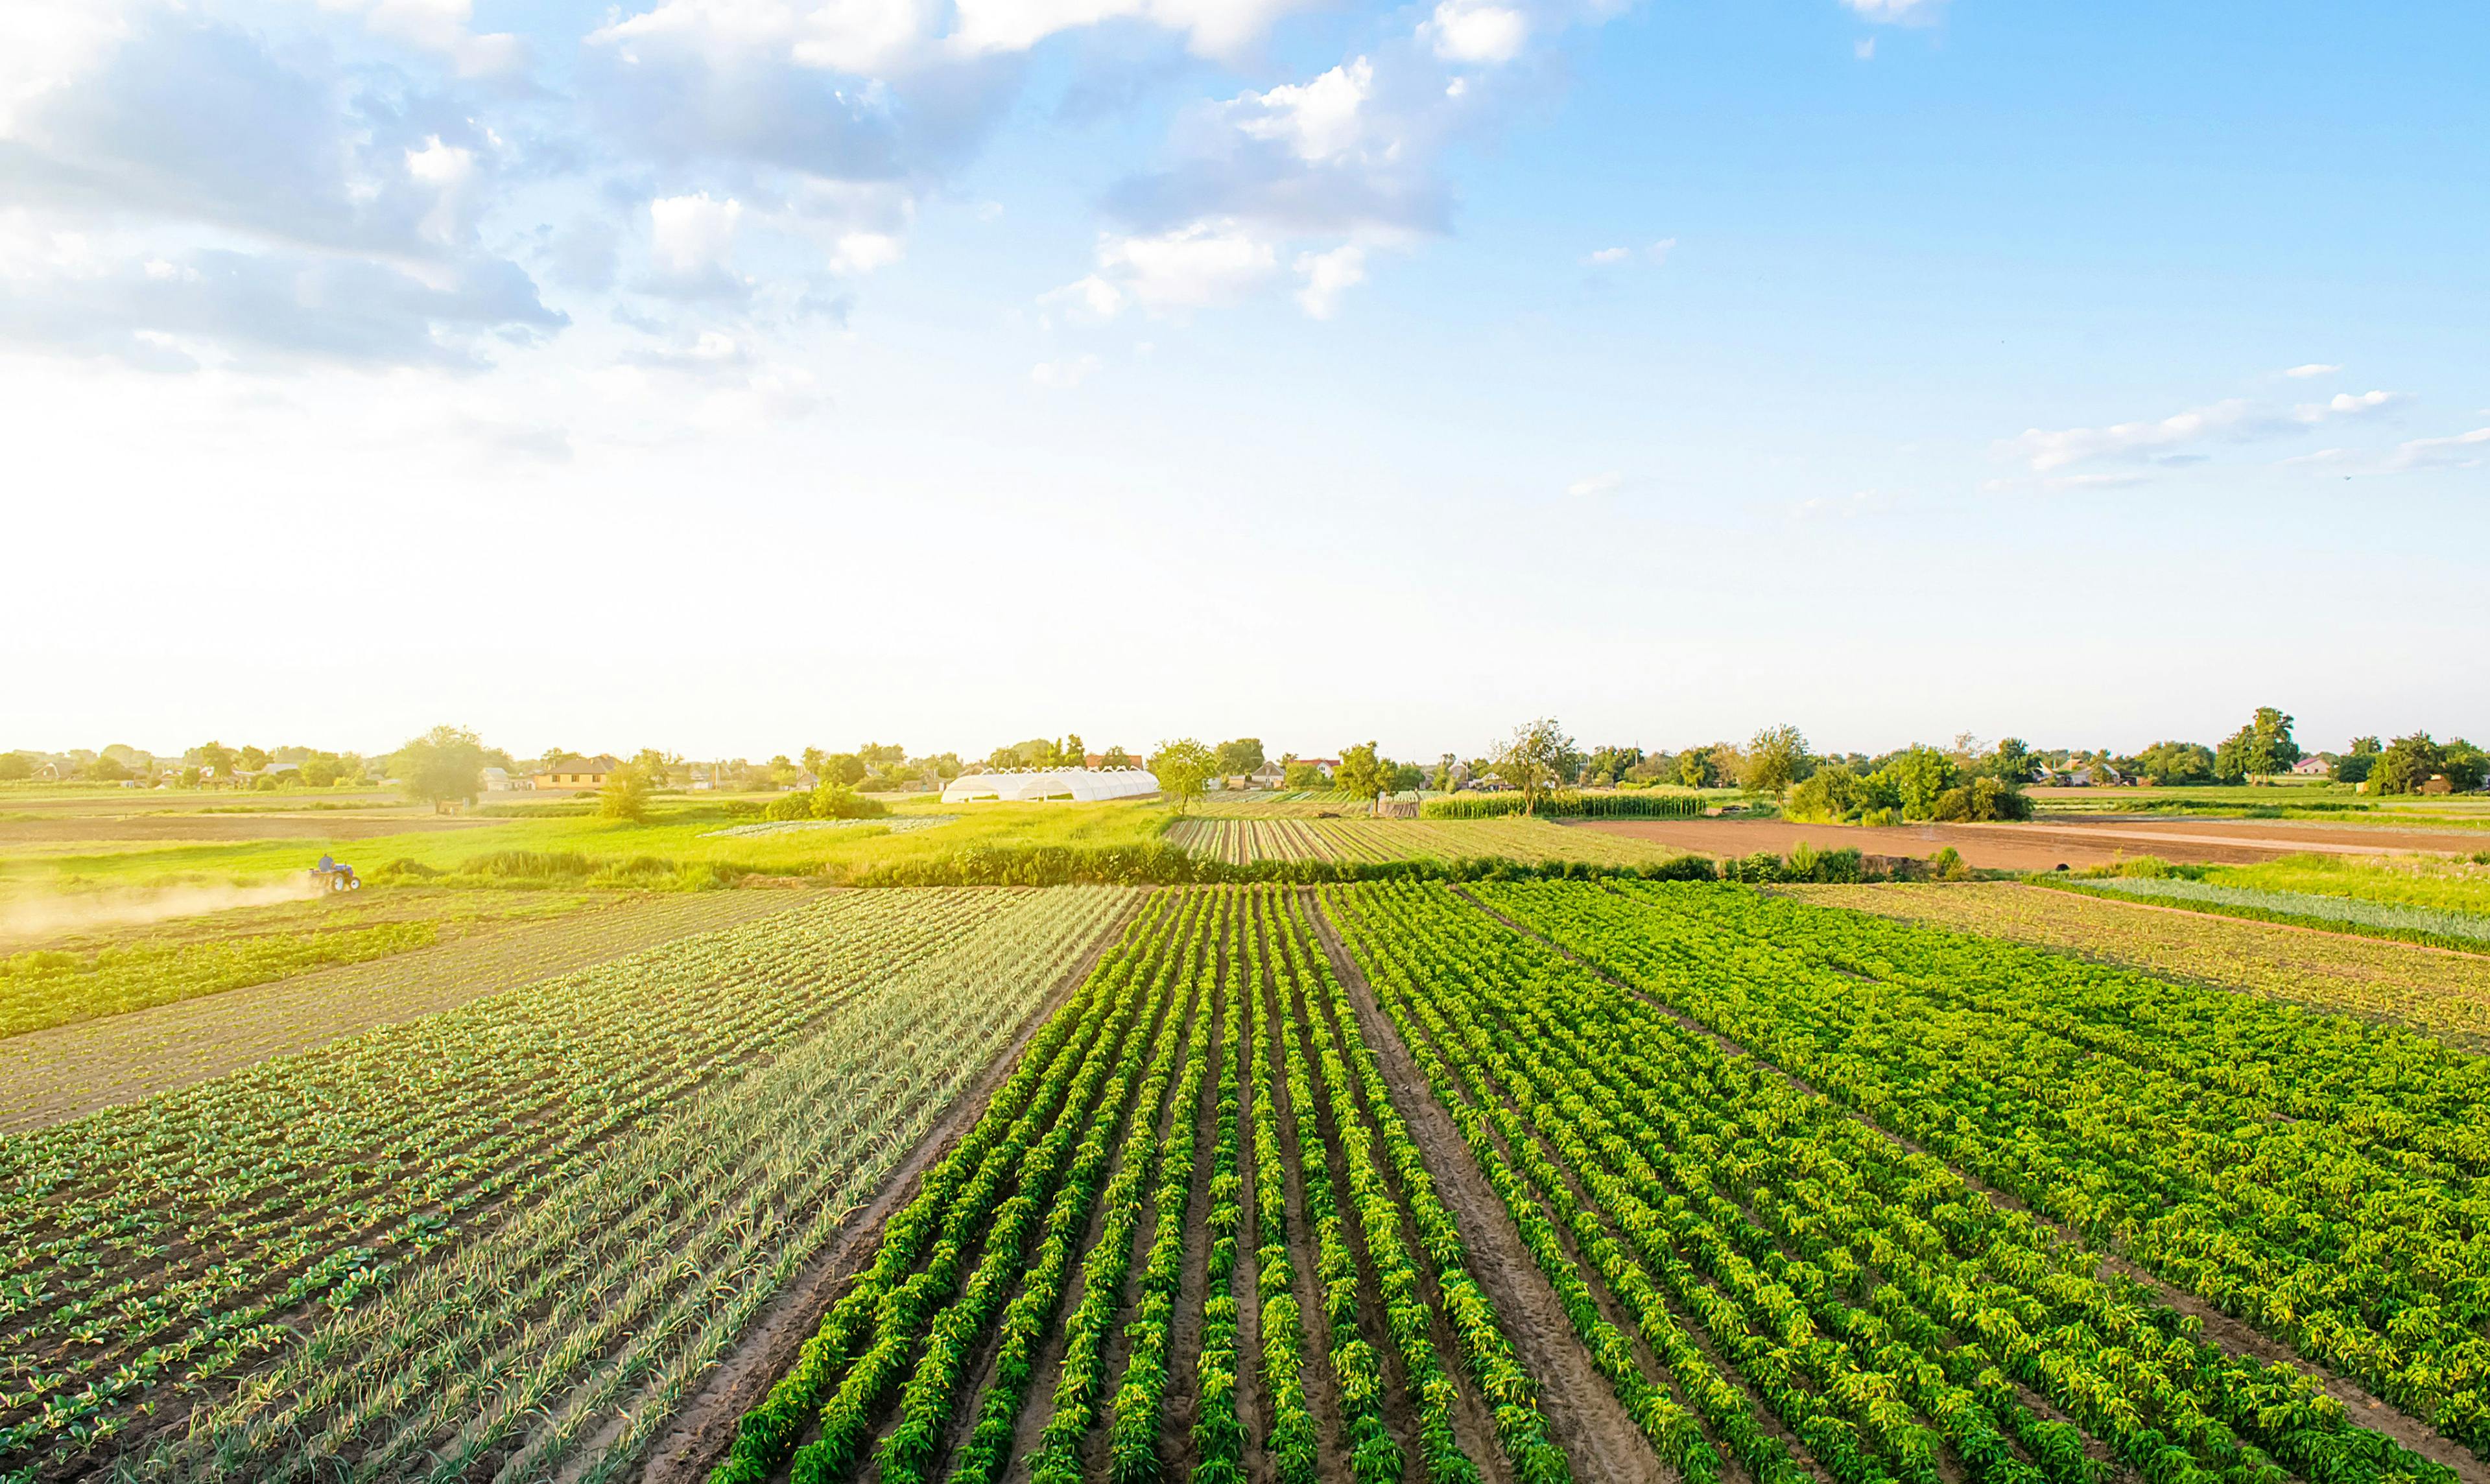 Beautiful landscape of farm fields. Cultivation of crops, production of food and raw materials. Top view of the countryside. Agriculture land and farming. Pepper plantation, leek, cabbage | Image Credit: © Andrii Yalanskyi - stock.adobe.com.